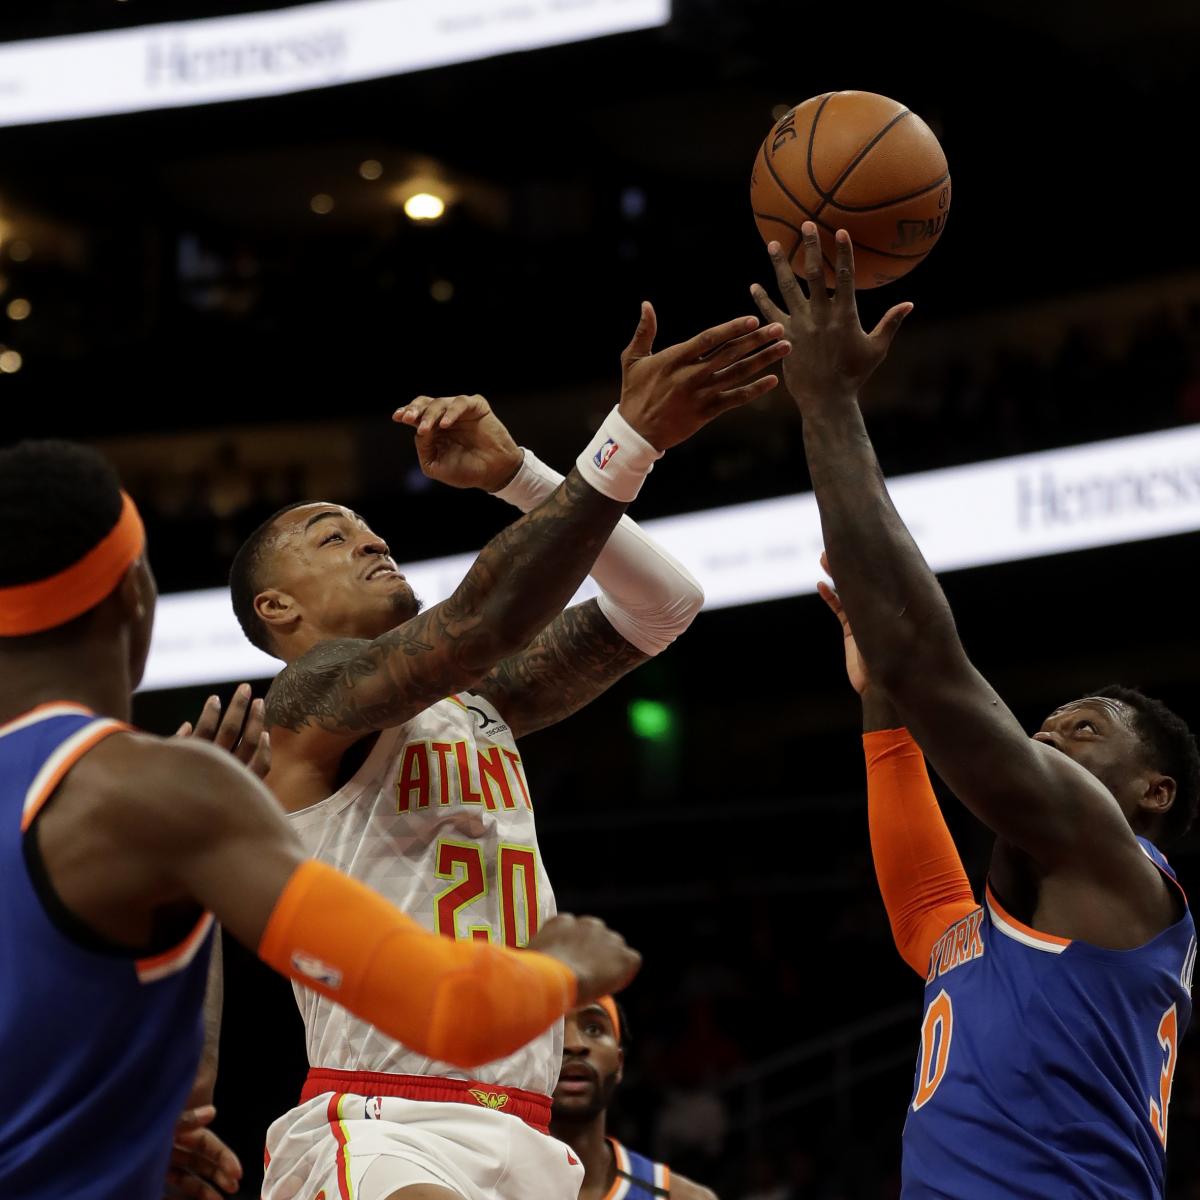 File: NBA Acquired’t Allow Knicks, Non-Bubble Teams to Withhold Crucial Summer OTAs